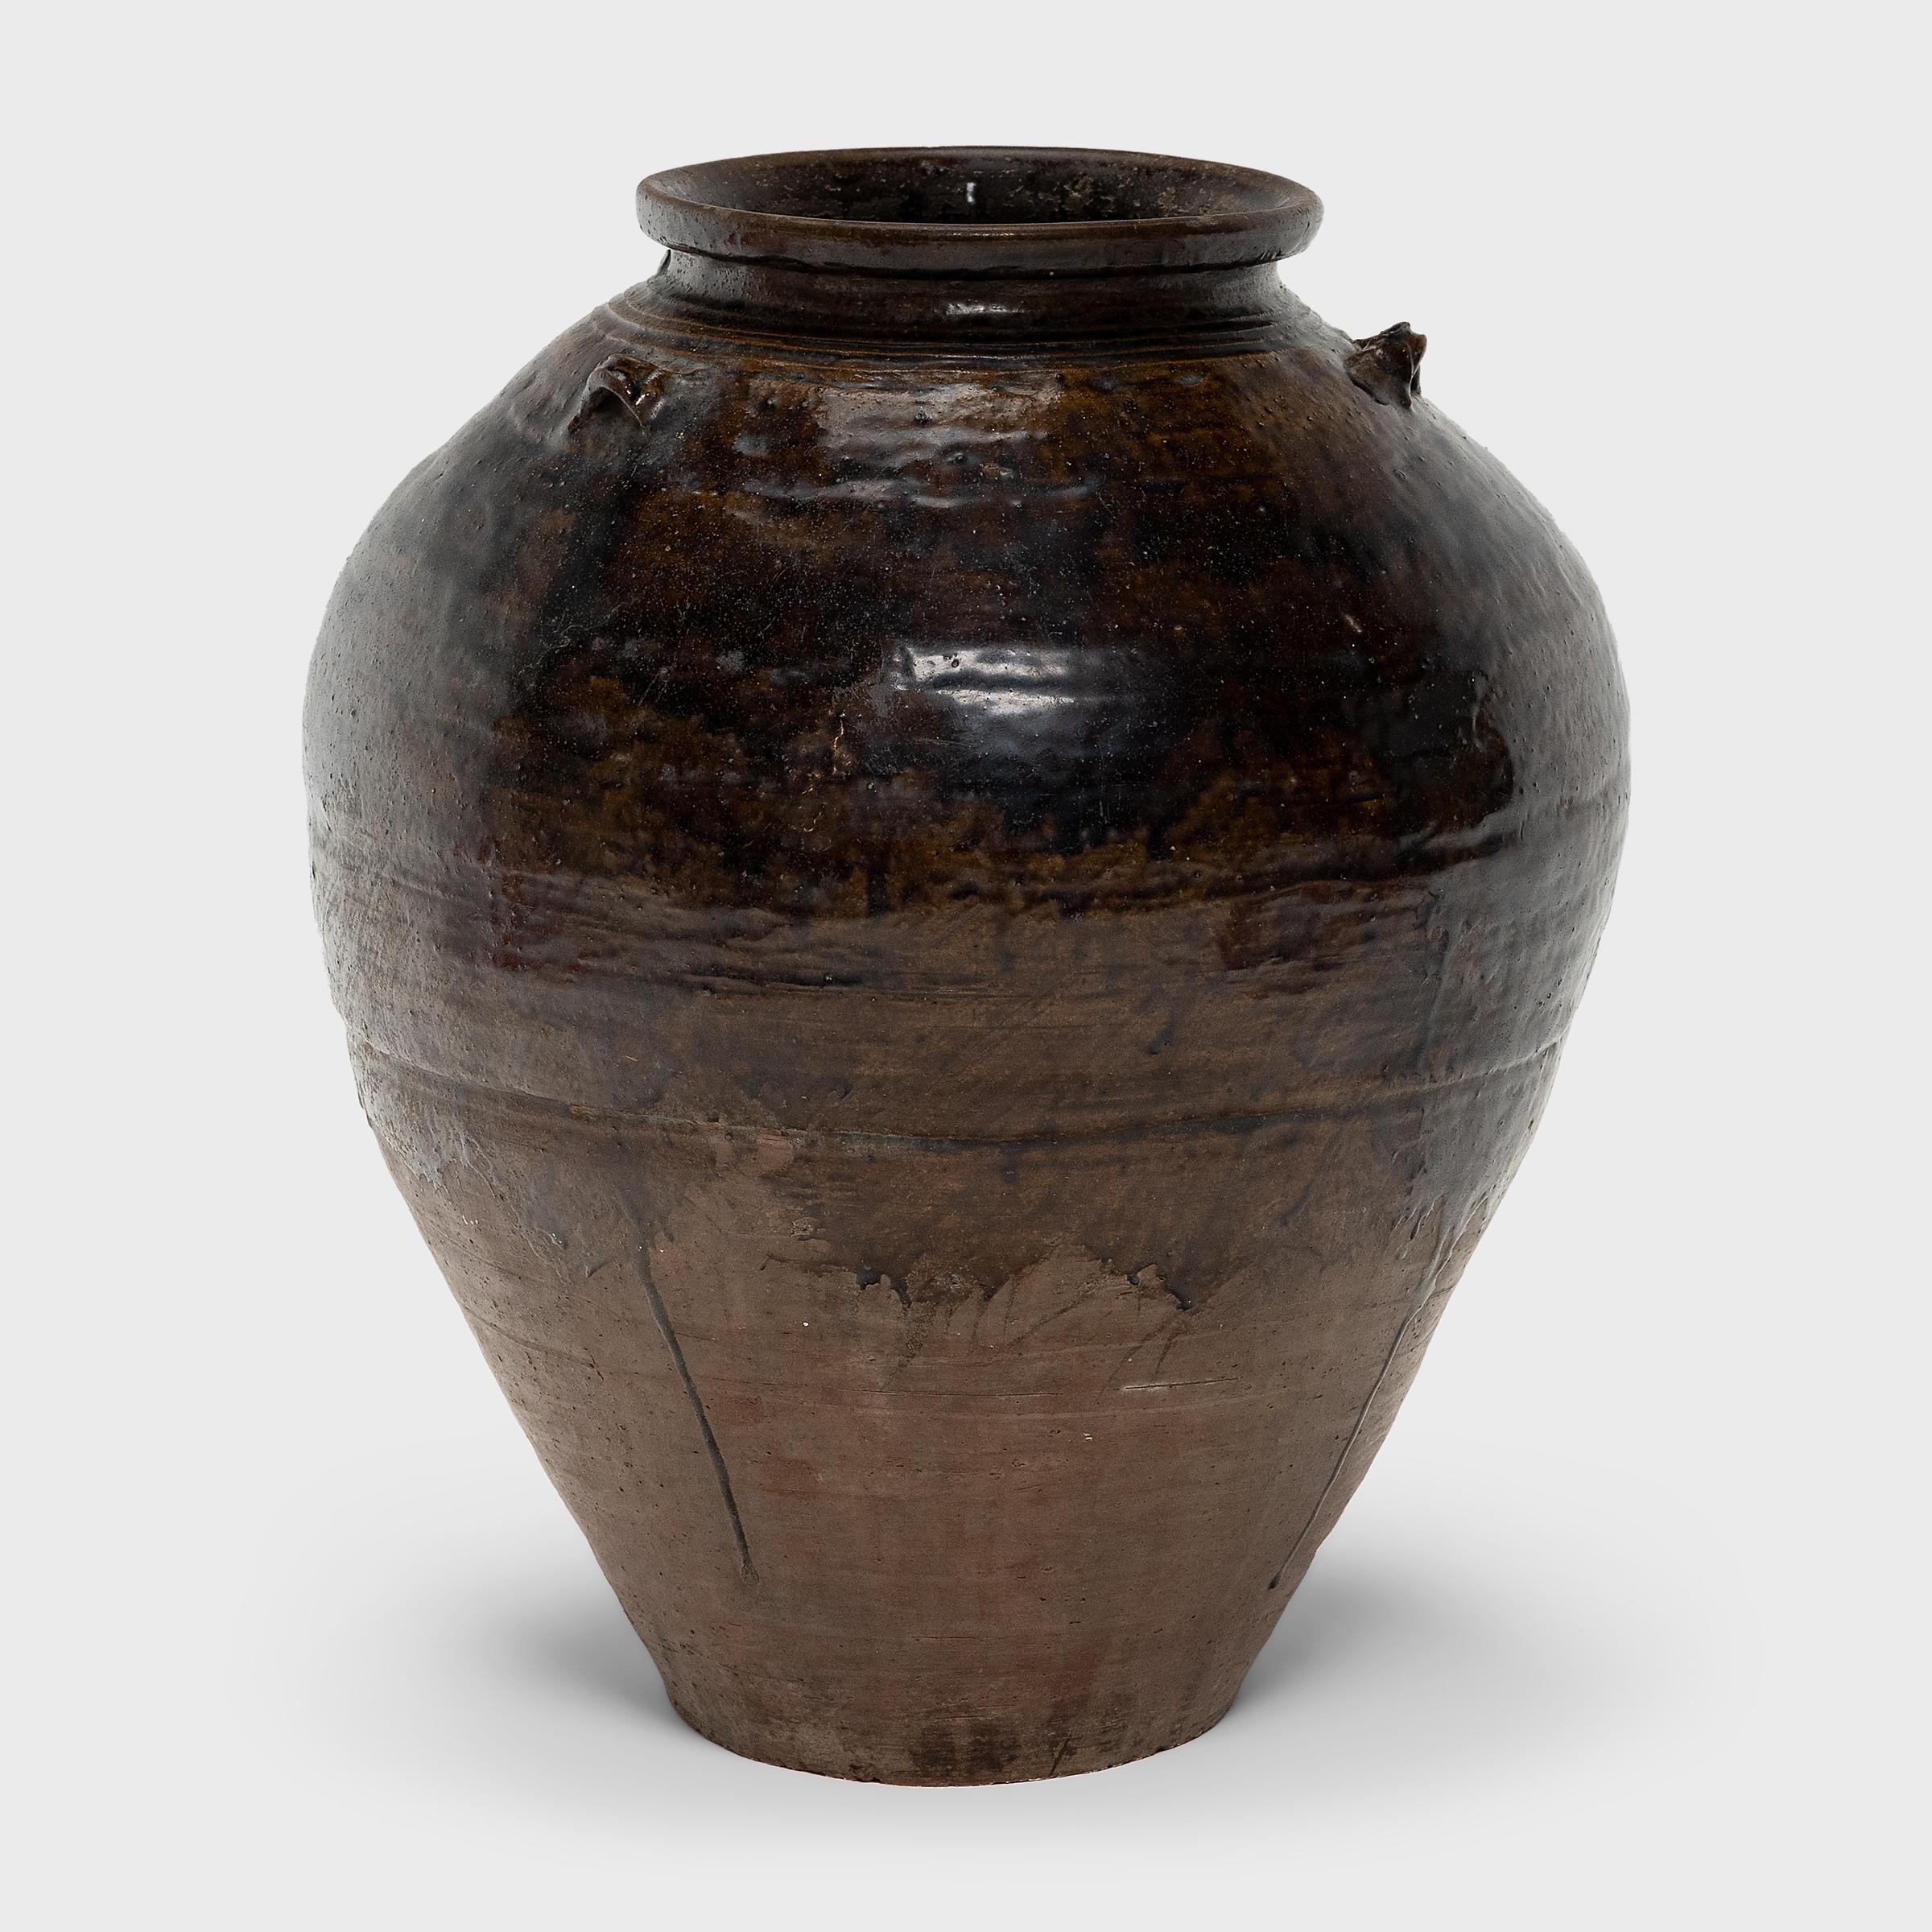 This large, glazed stoneware vessel is a Meiji-era Japanese storage jar (tsubo) used for storing rice wine, water or even tea leaves and spices. Sometimes referred to as a Martaban jar due to historic trade routes, this style of unrefined, ovoid jar